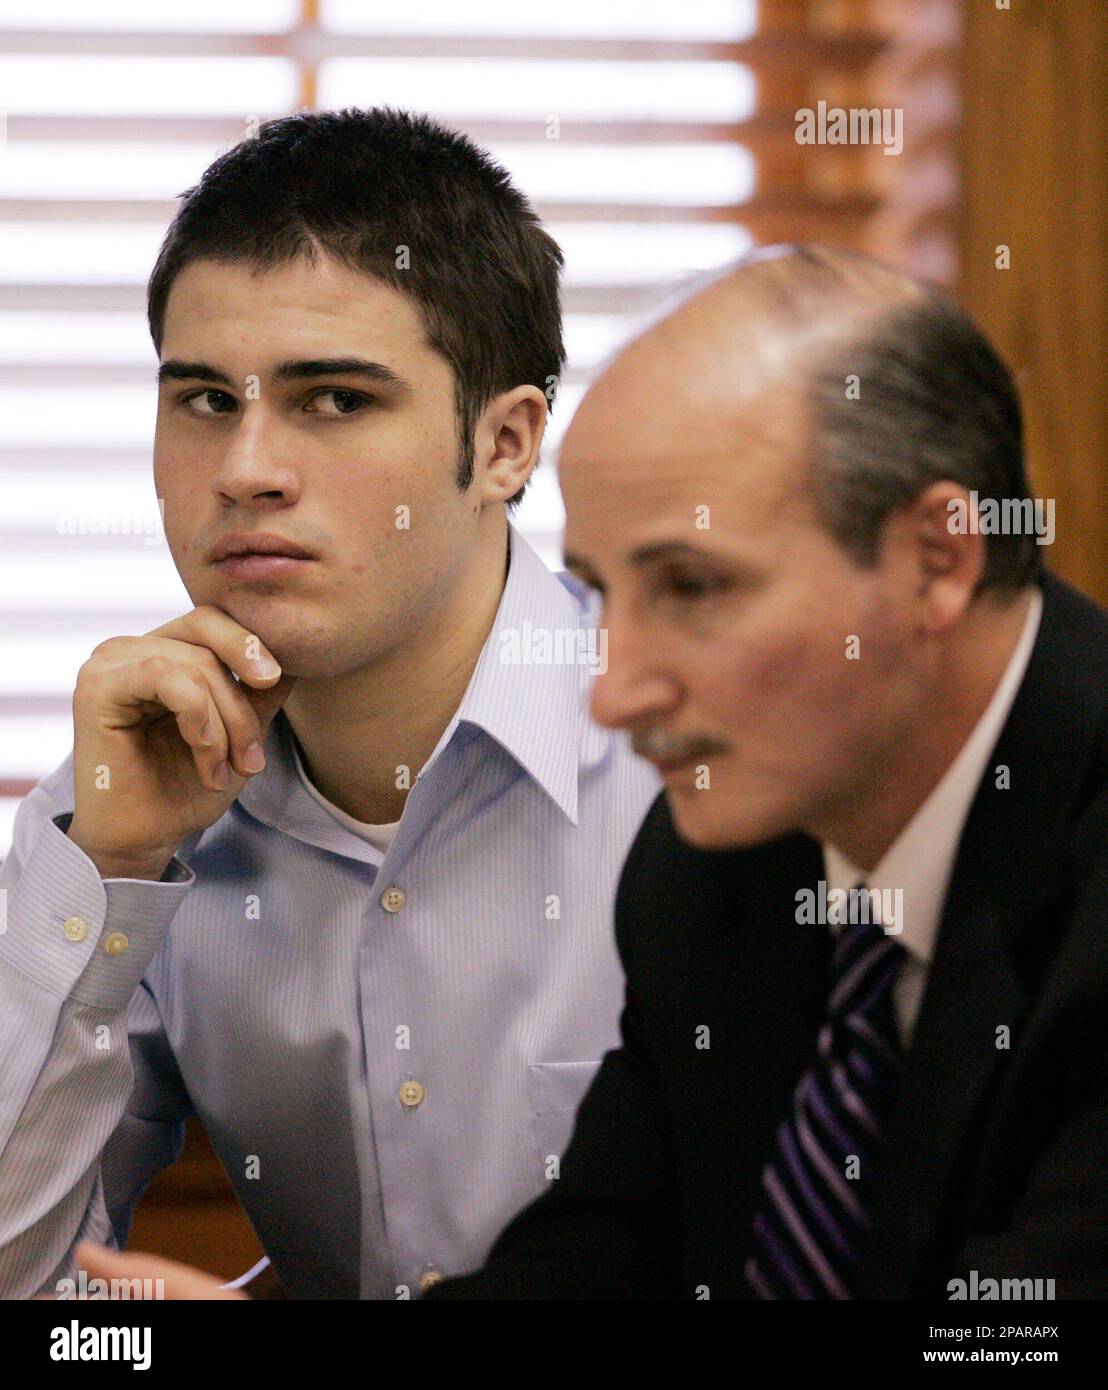 Defendant Jean Pierre Orlewicz, 17, of Plymouth Township, Mich. left,  listens as his attorney James C. Thomas speaks during a preliminary  examination, Friday, Nov. 30, 2007 in Plymouth, Mich. Canton High School